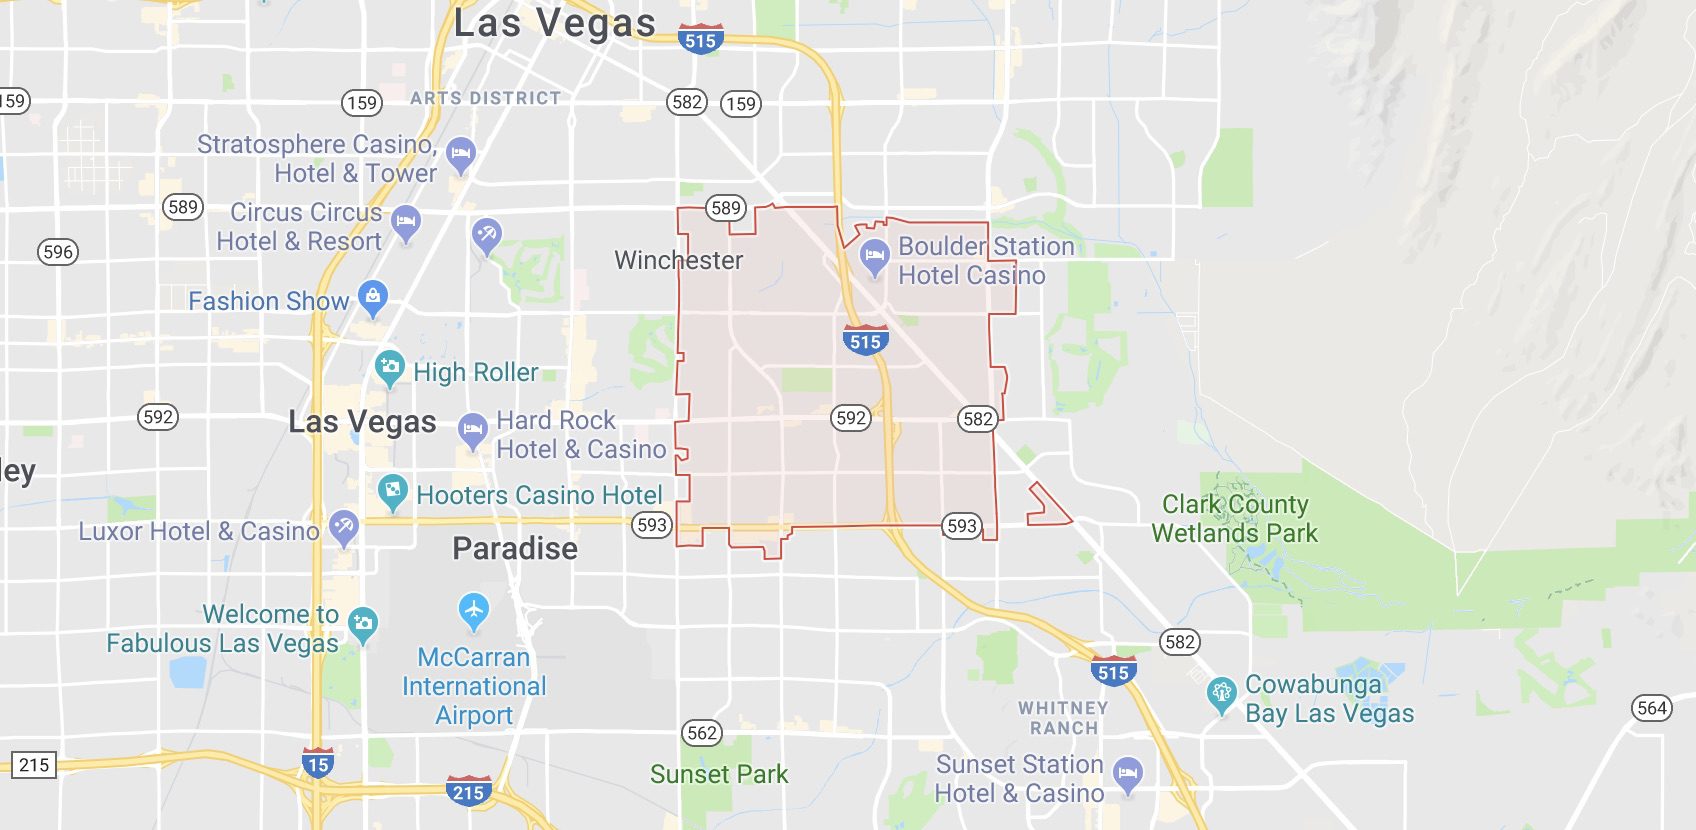 The south las vegas zip code 89121 is marked out in red on a Las Vegas city map